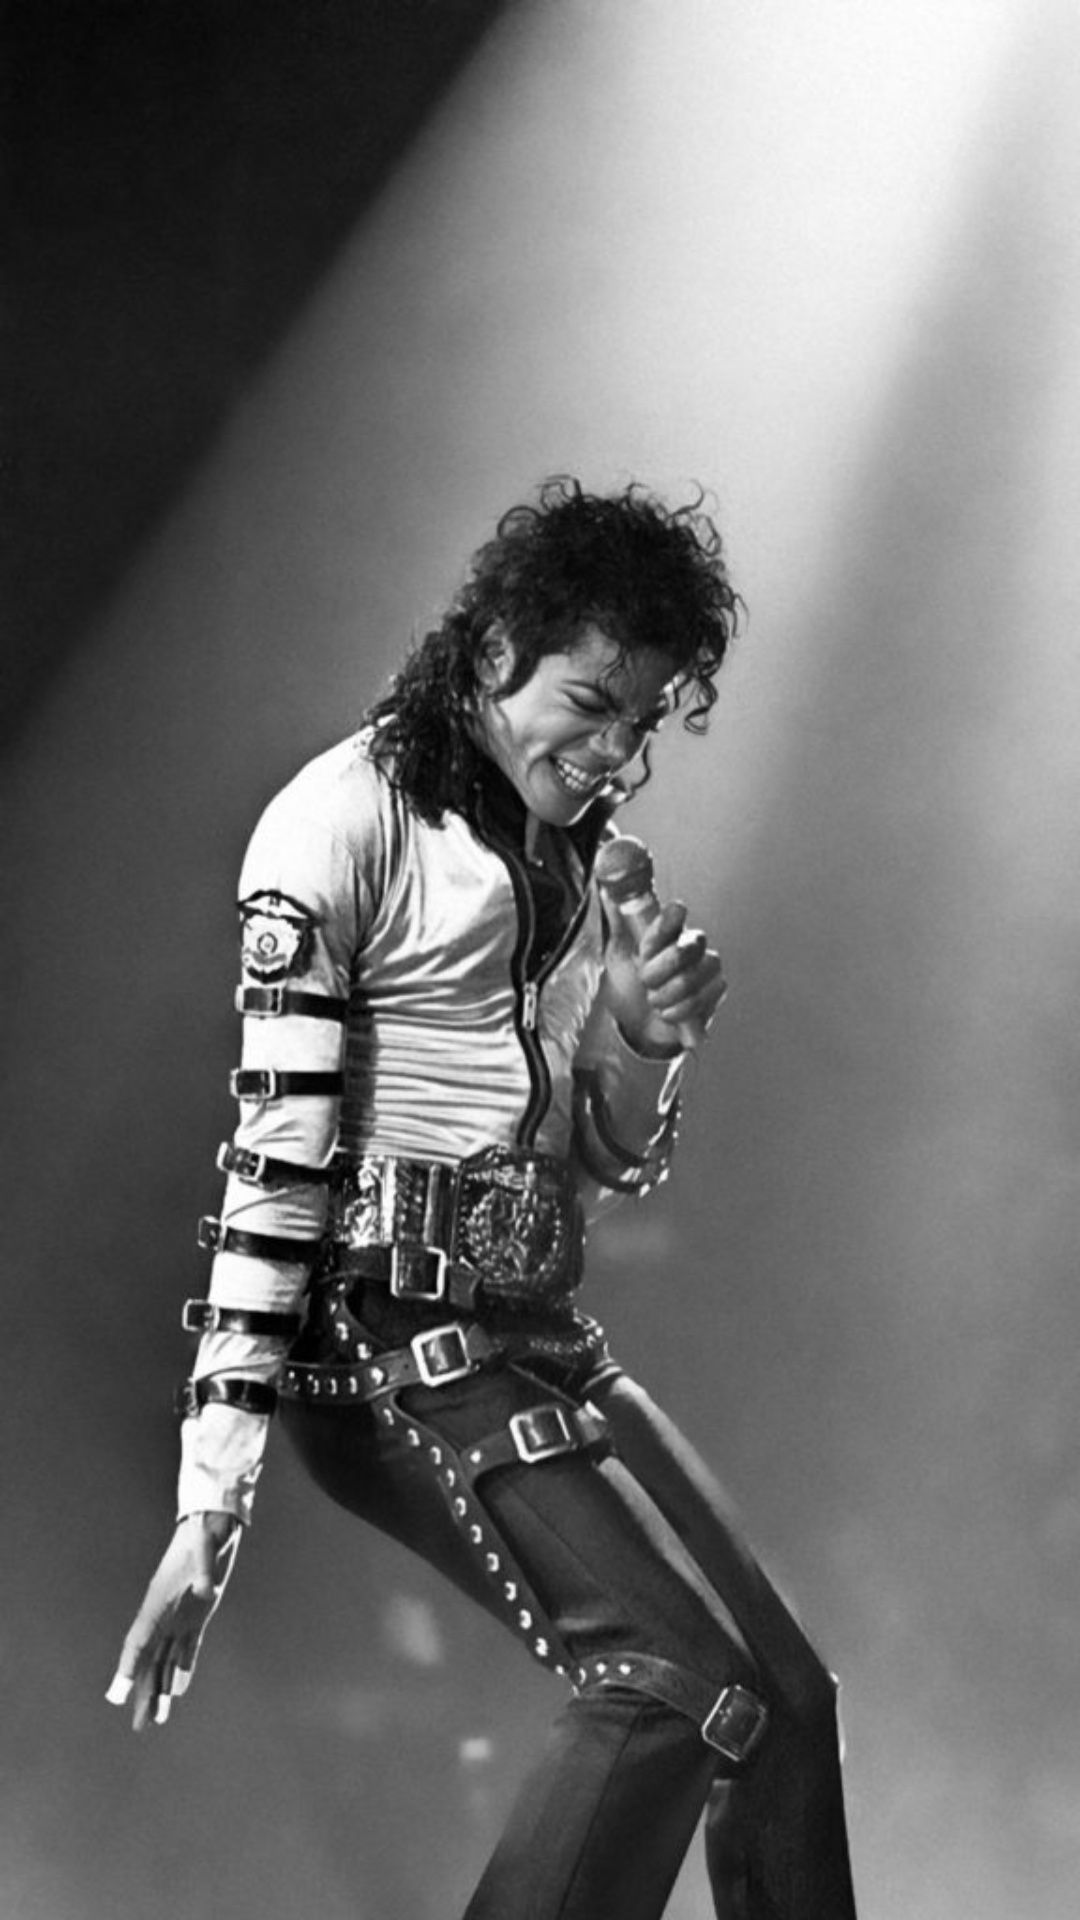 Michael Jackson performing on stage in a black and white photo - Michael Jackson